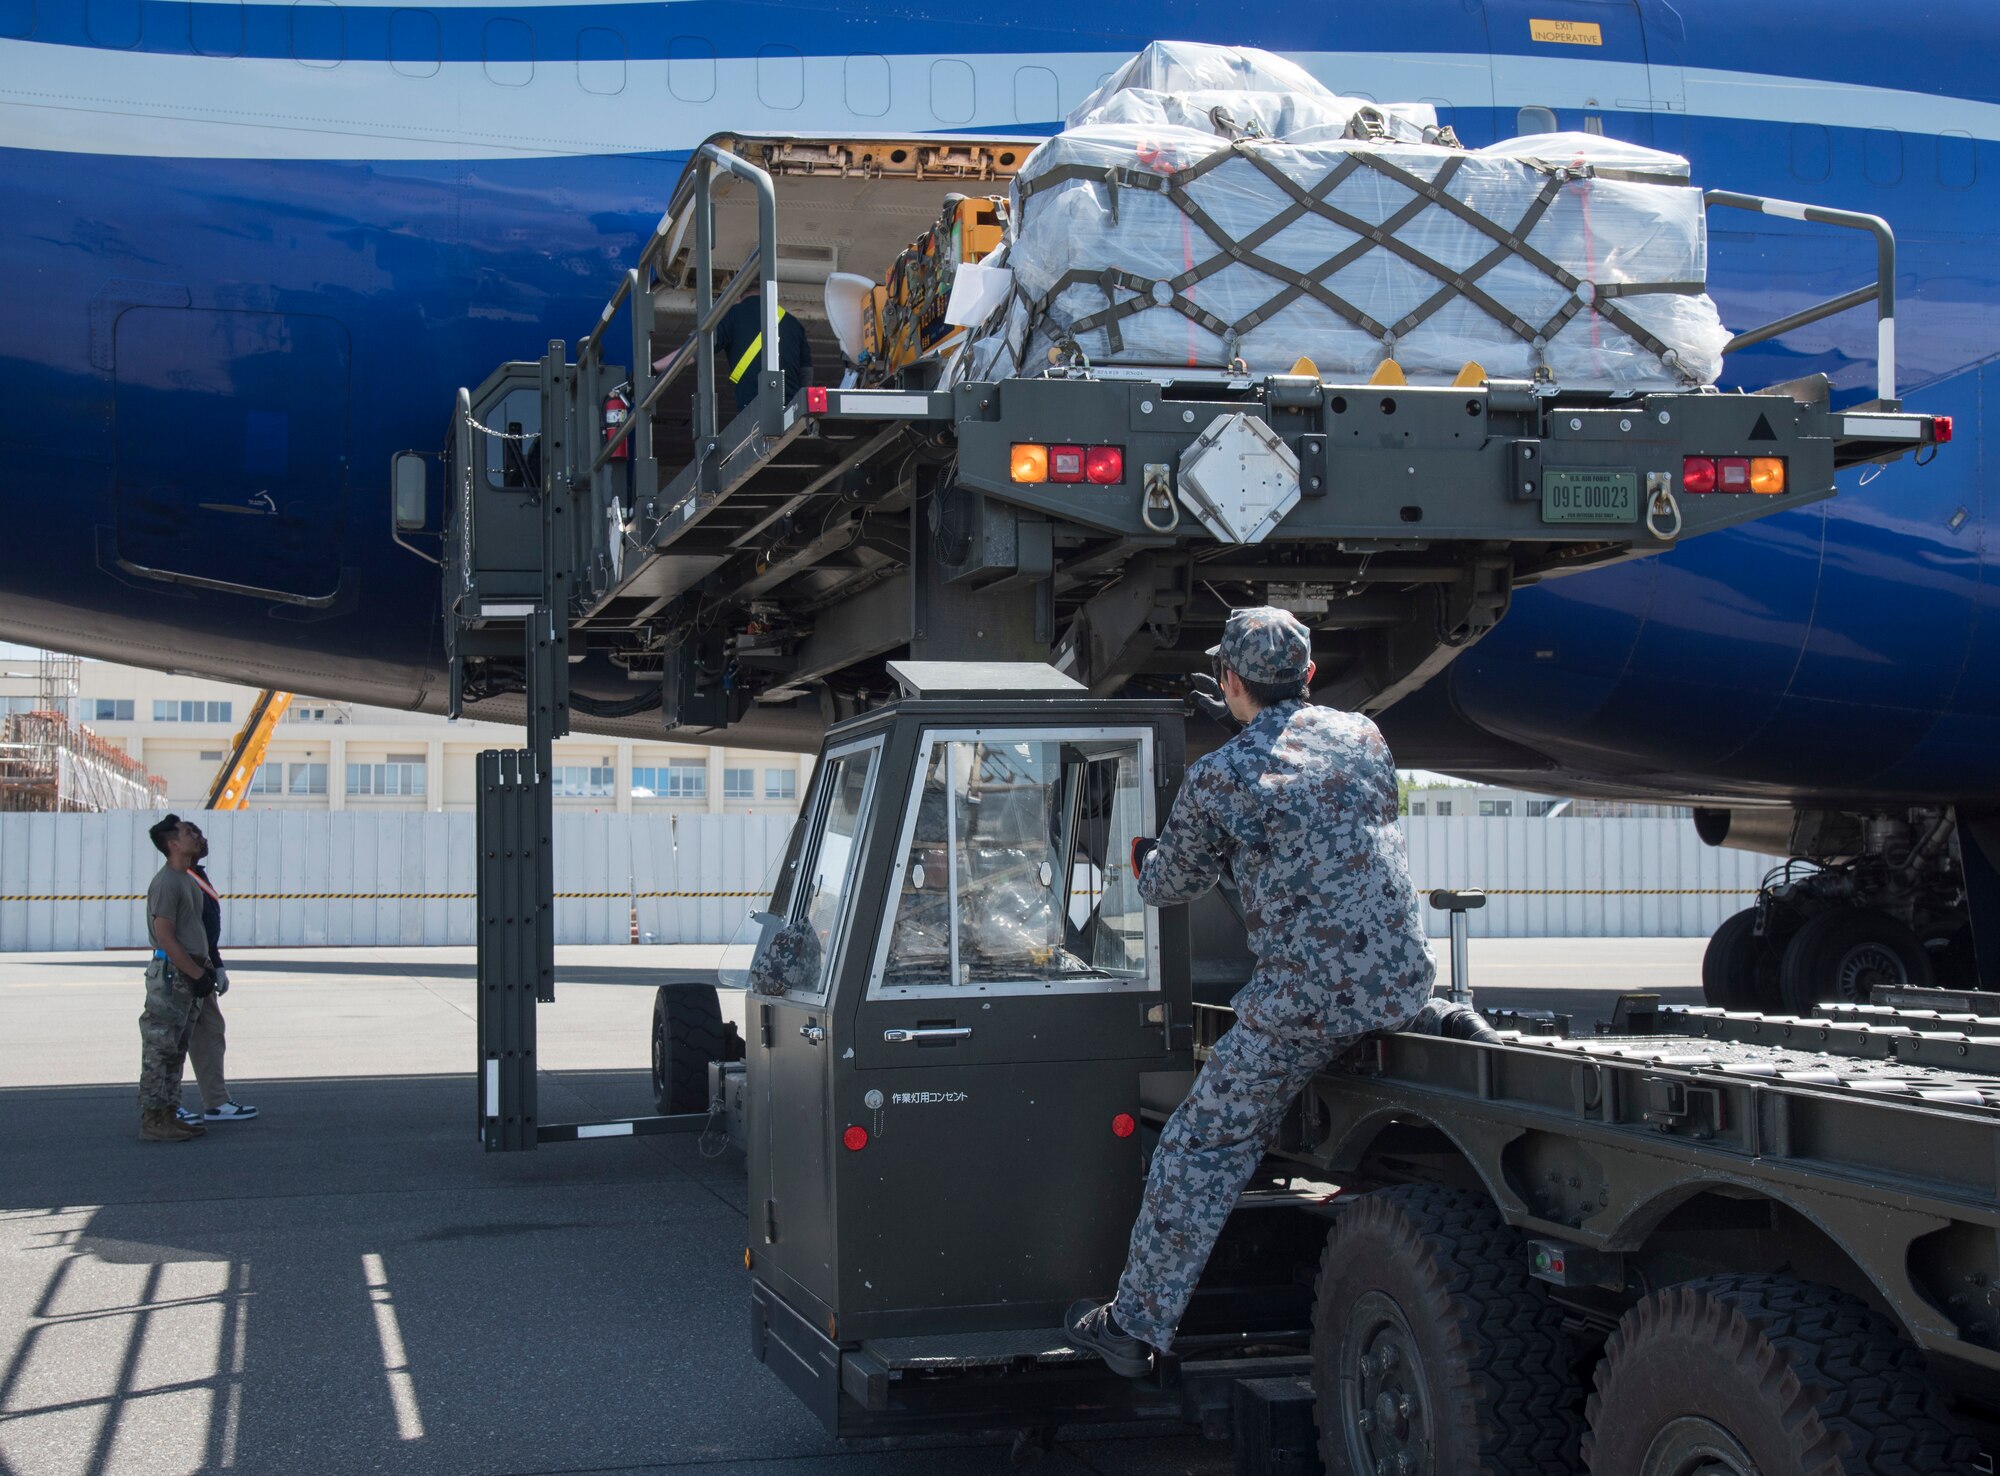 U.S. Air Force and Japan Air Self Defense Force personnel load supplies headed for RED FLAG-Alaska 19-2 into a Boeing 747 at Misawa Air Base, Japan, May 25, 2019. The bilateral coordination of cargo included 35th Logistics Readiness Squadron, PACAF Air Mobility Command, JASDF and the 35th munitions flight. (U.S. Air Force photo by Branden Yamada)